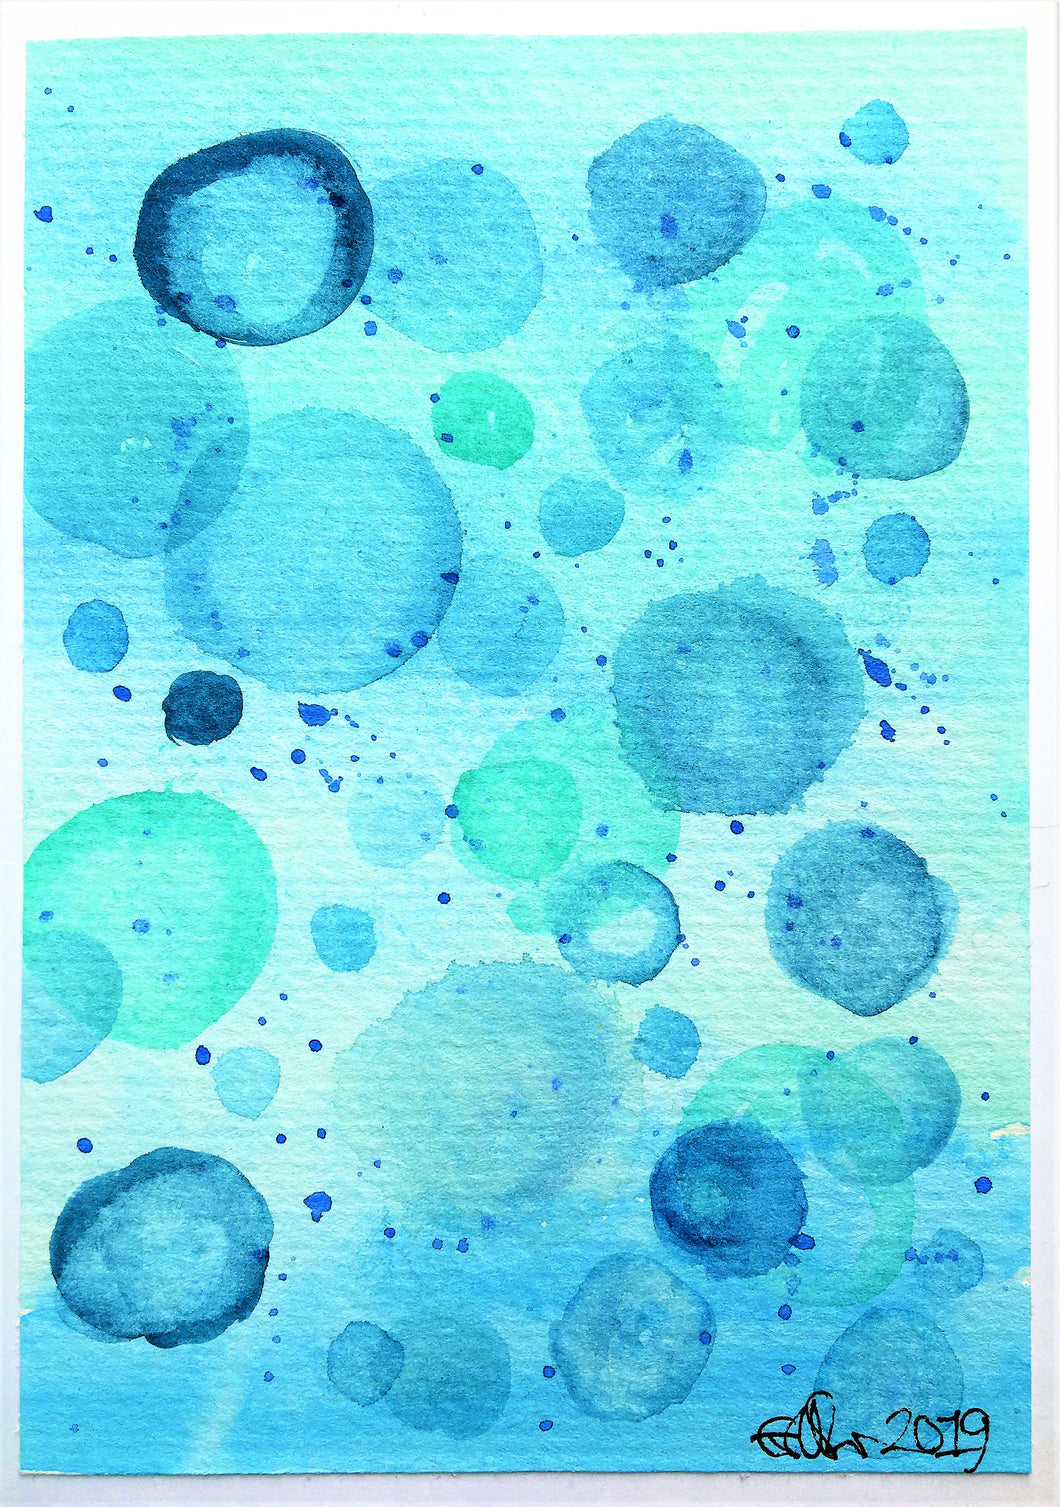 Handpainted Watercolour Greeting Card - Green/Blue with Splatter and Circles Design - eDgE dEsiGn London